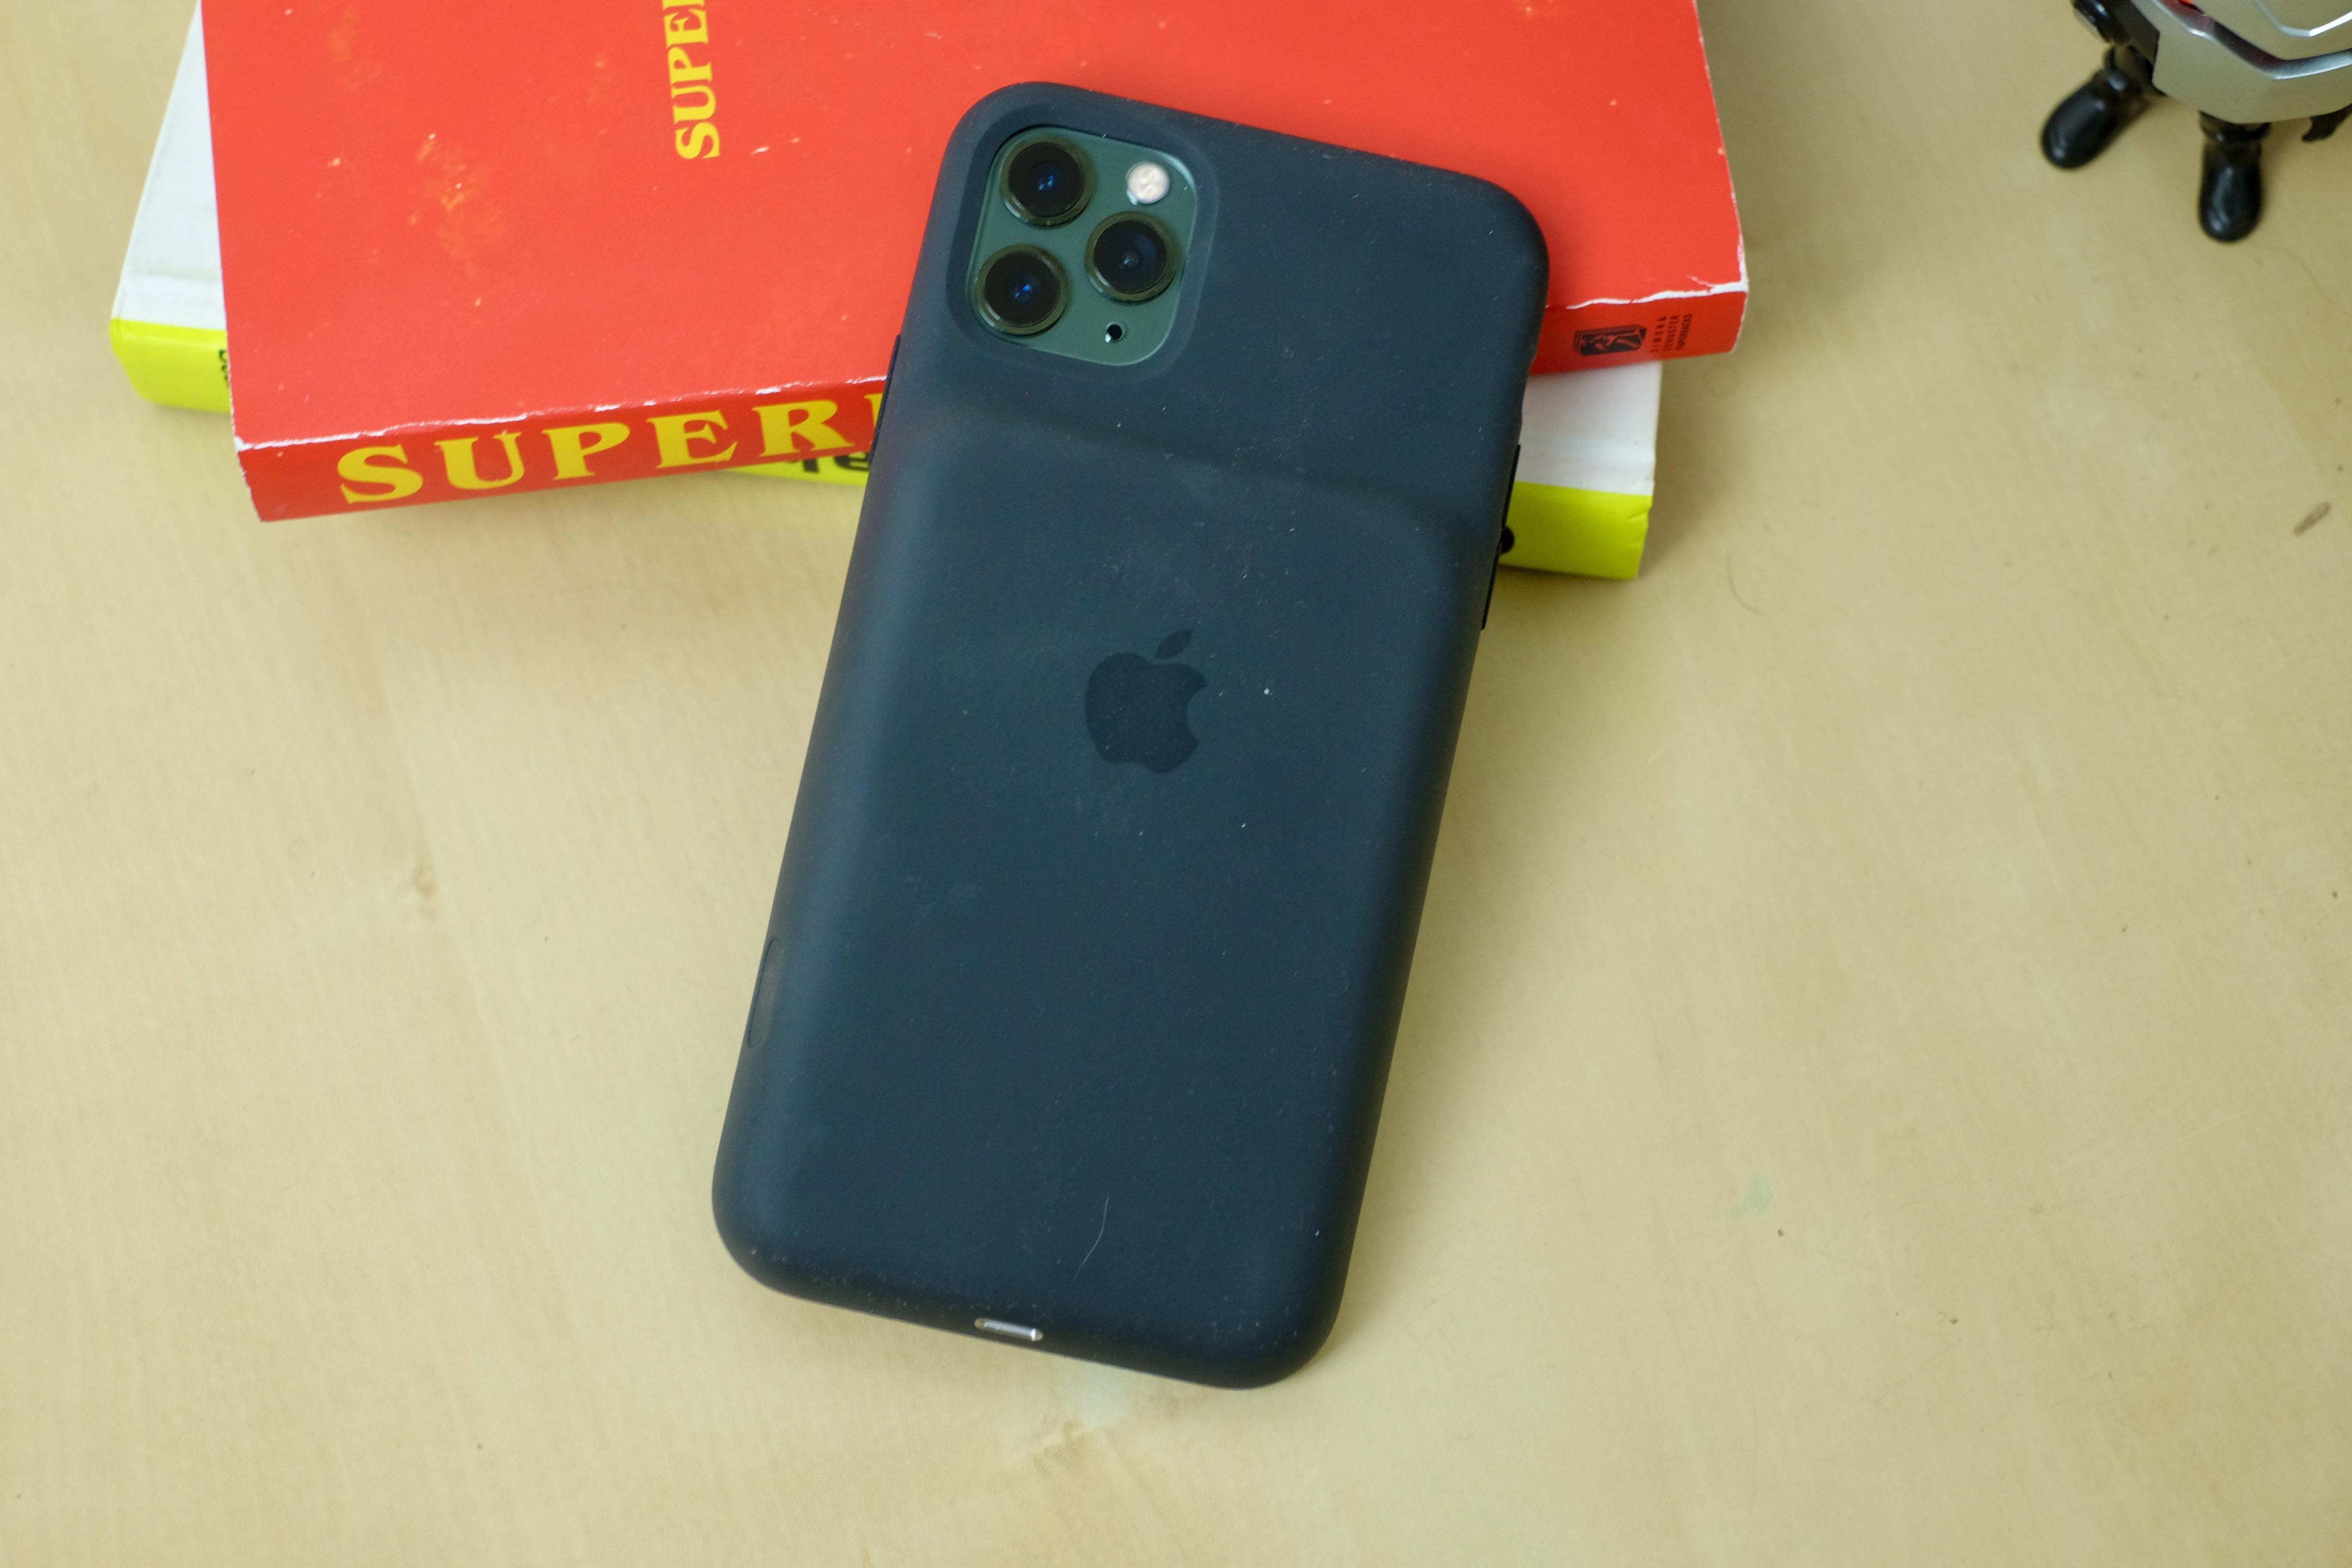 Apple's iPhone 11 Smart Battery Case review: This battery case